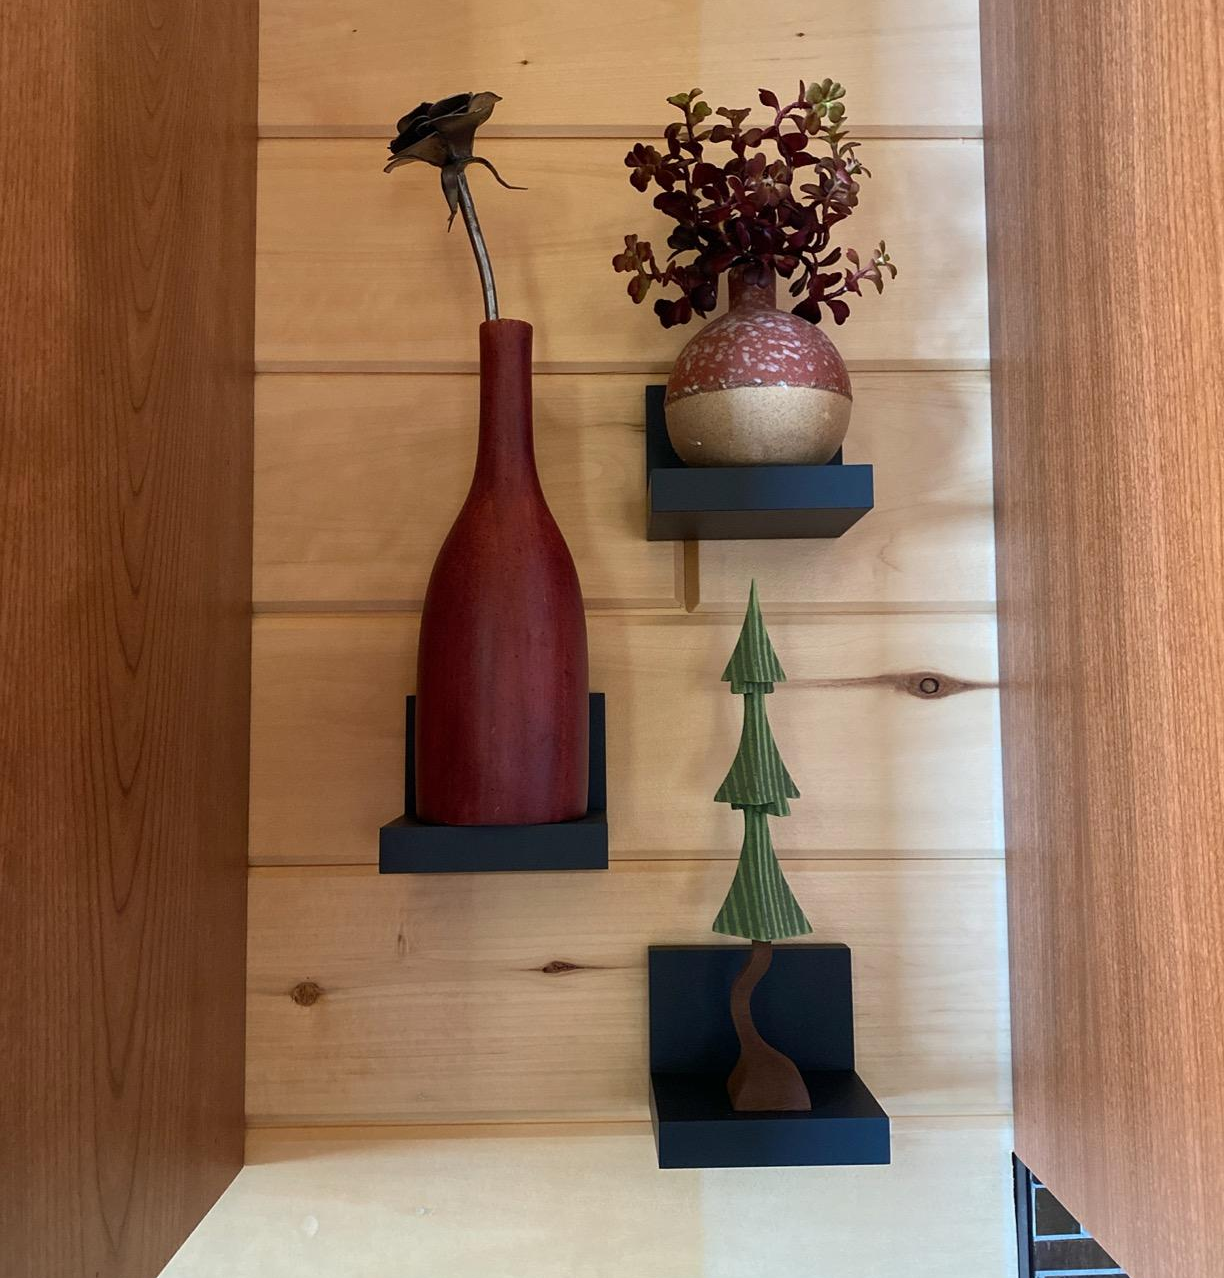 three of the black shelves on a wall holding decor